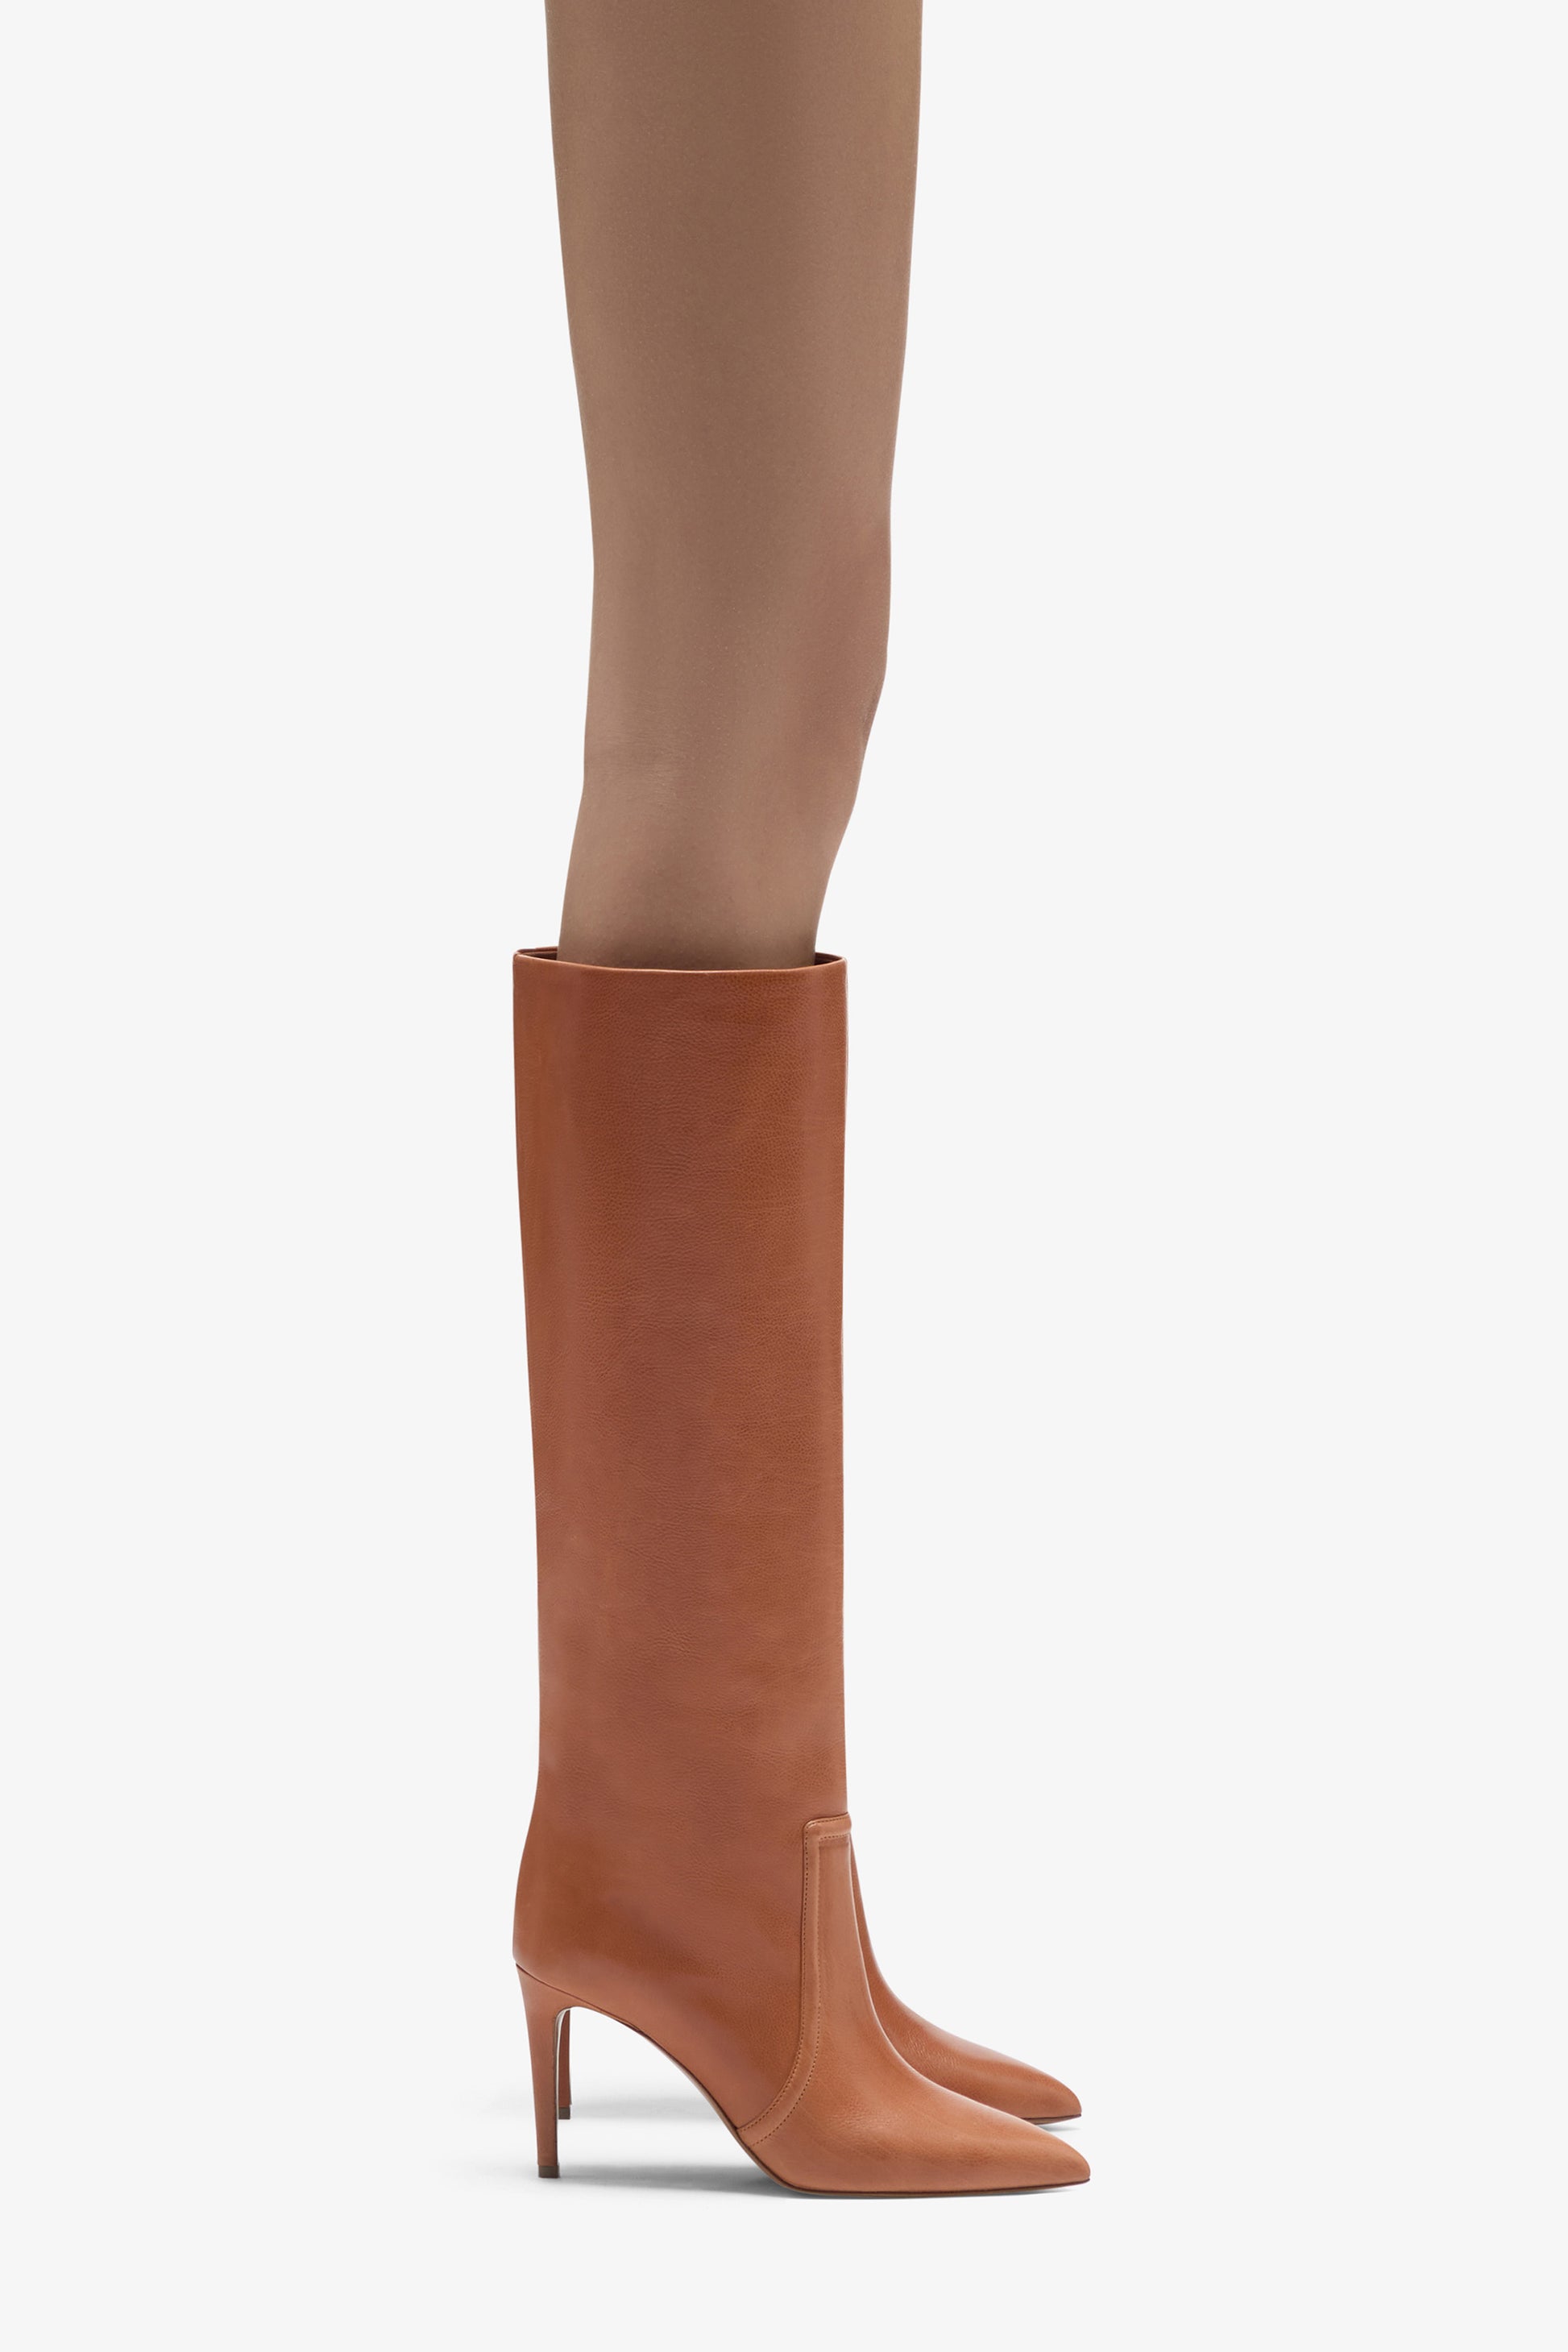 Tan leather boot - Product worn